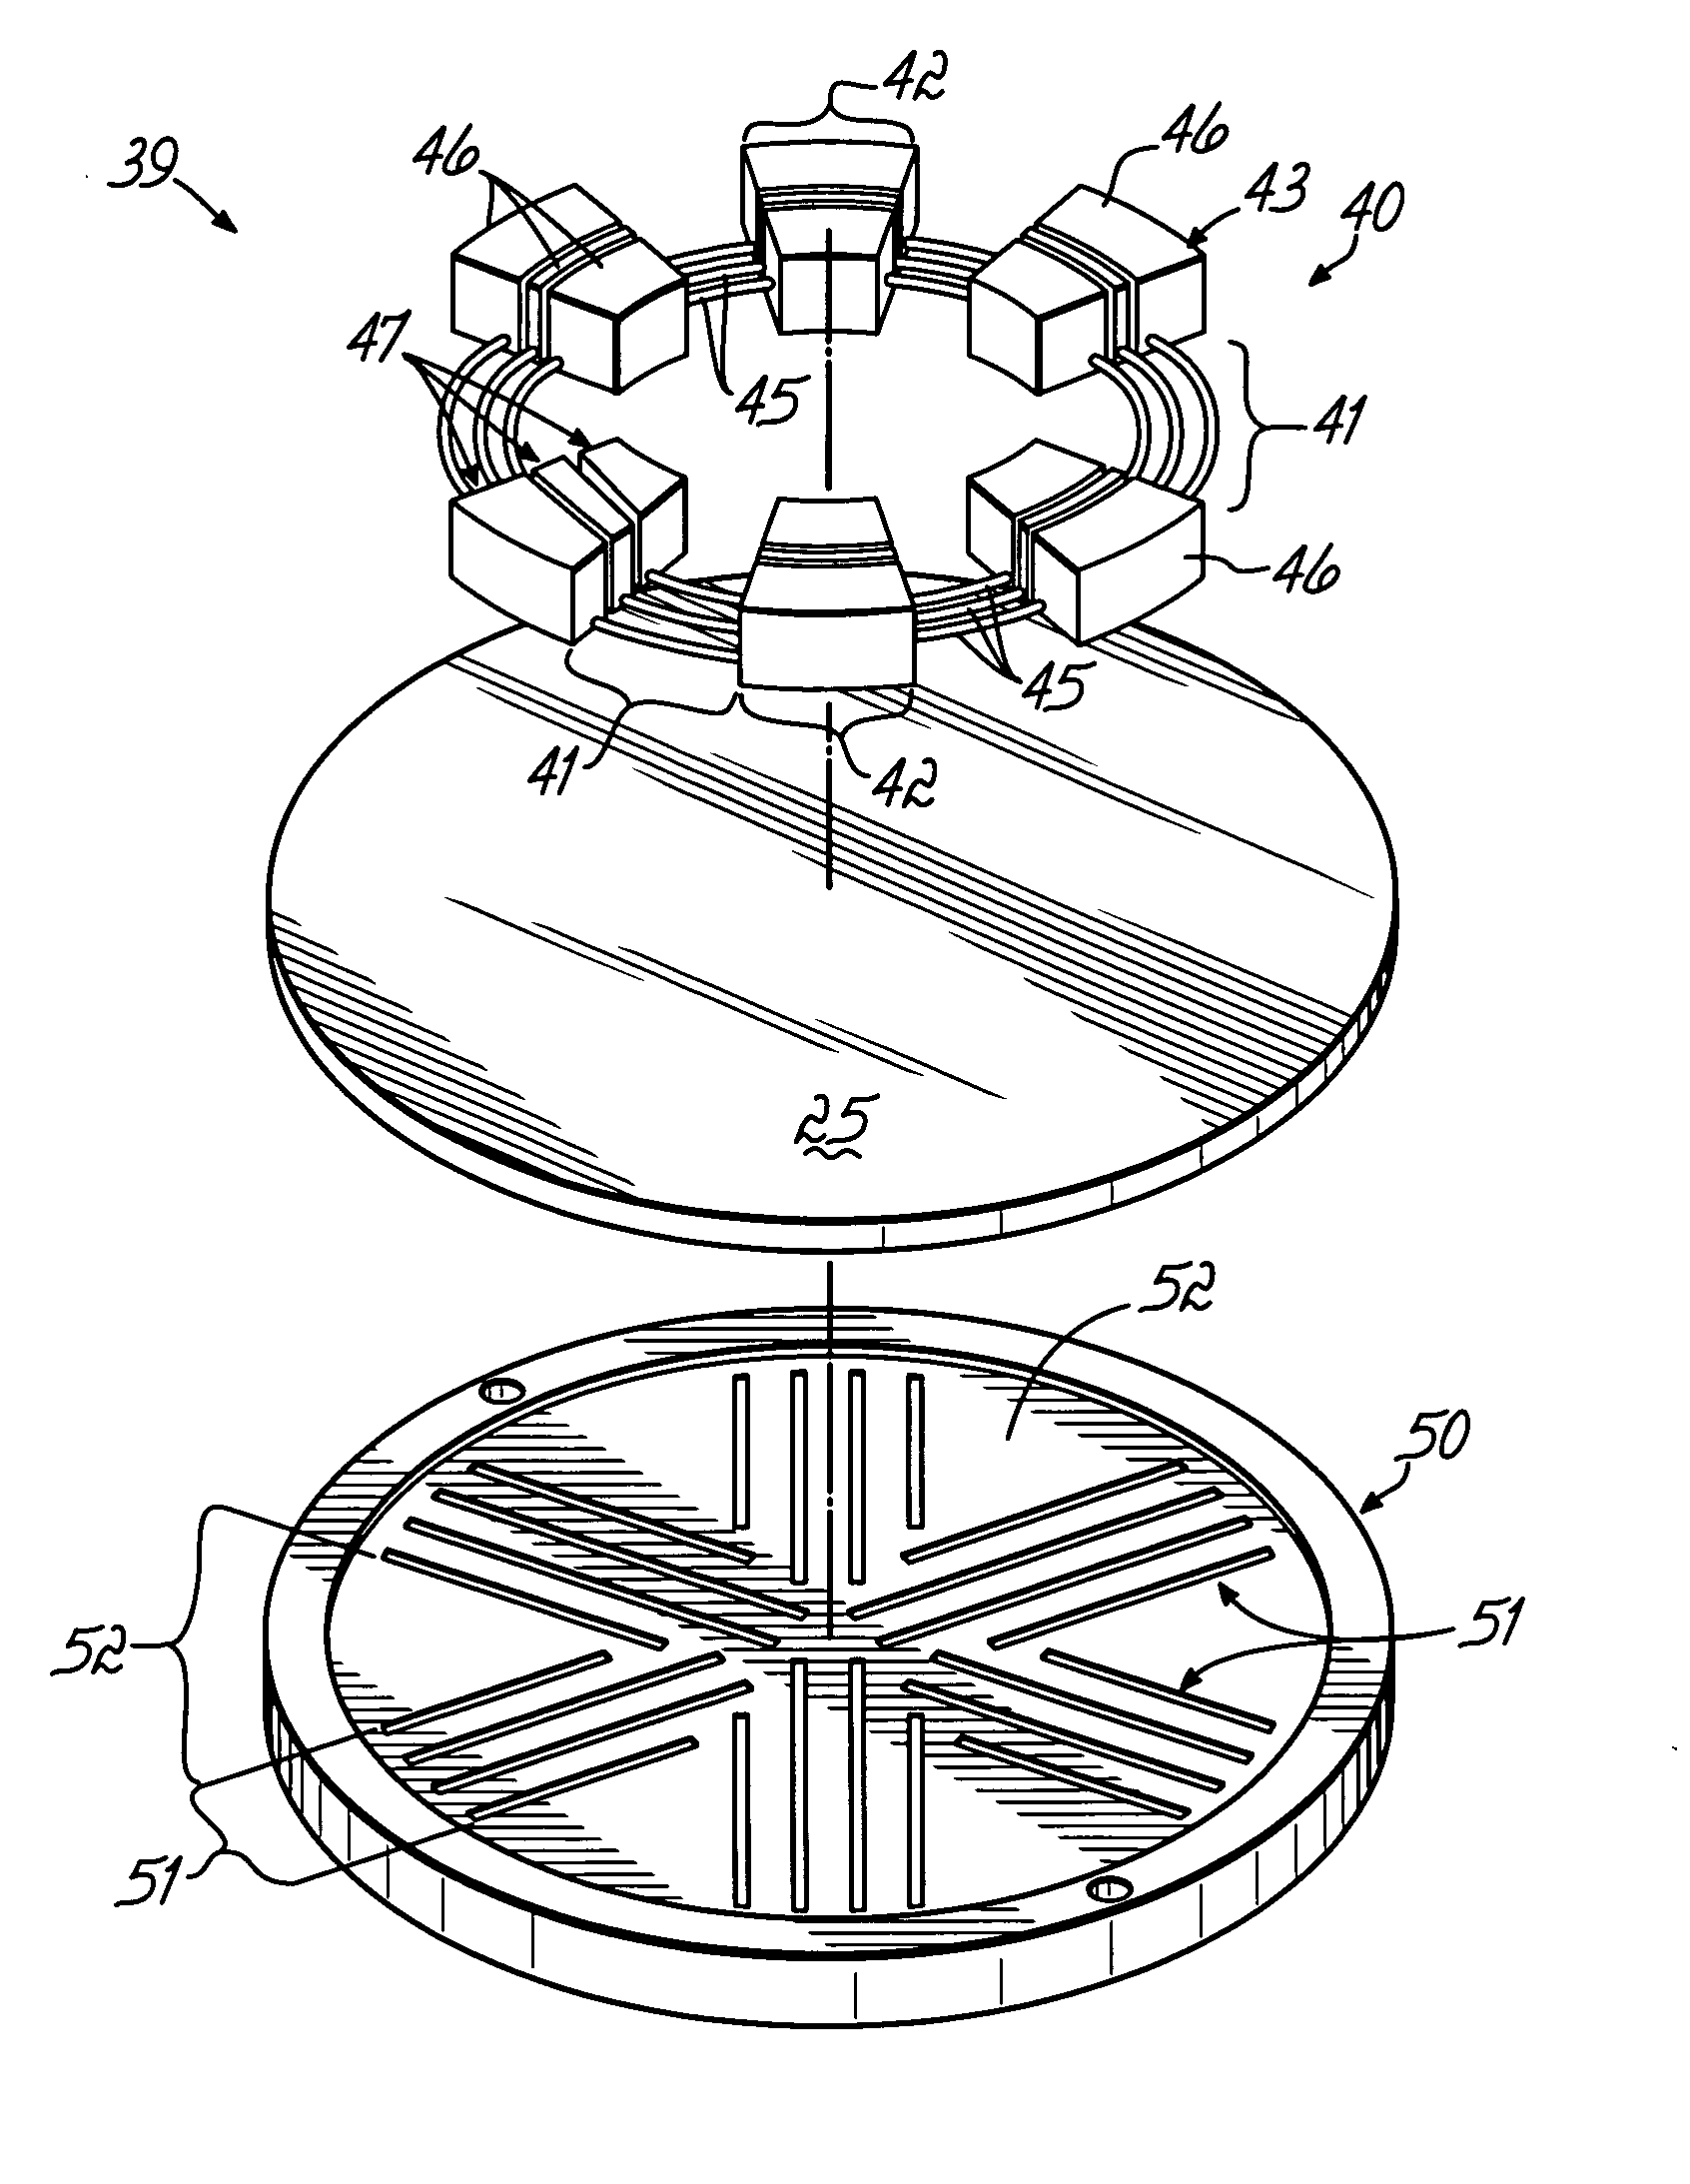 Plasma processing system with locally-efficient inductive plasma coupling